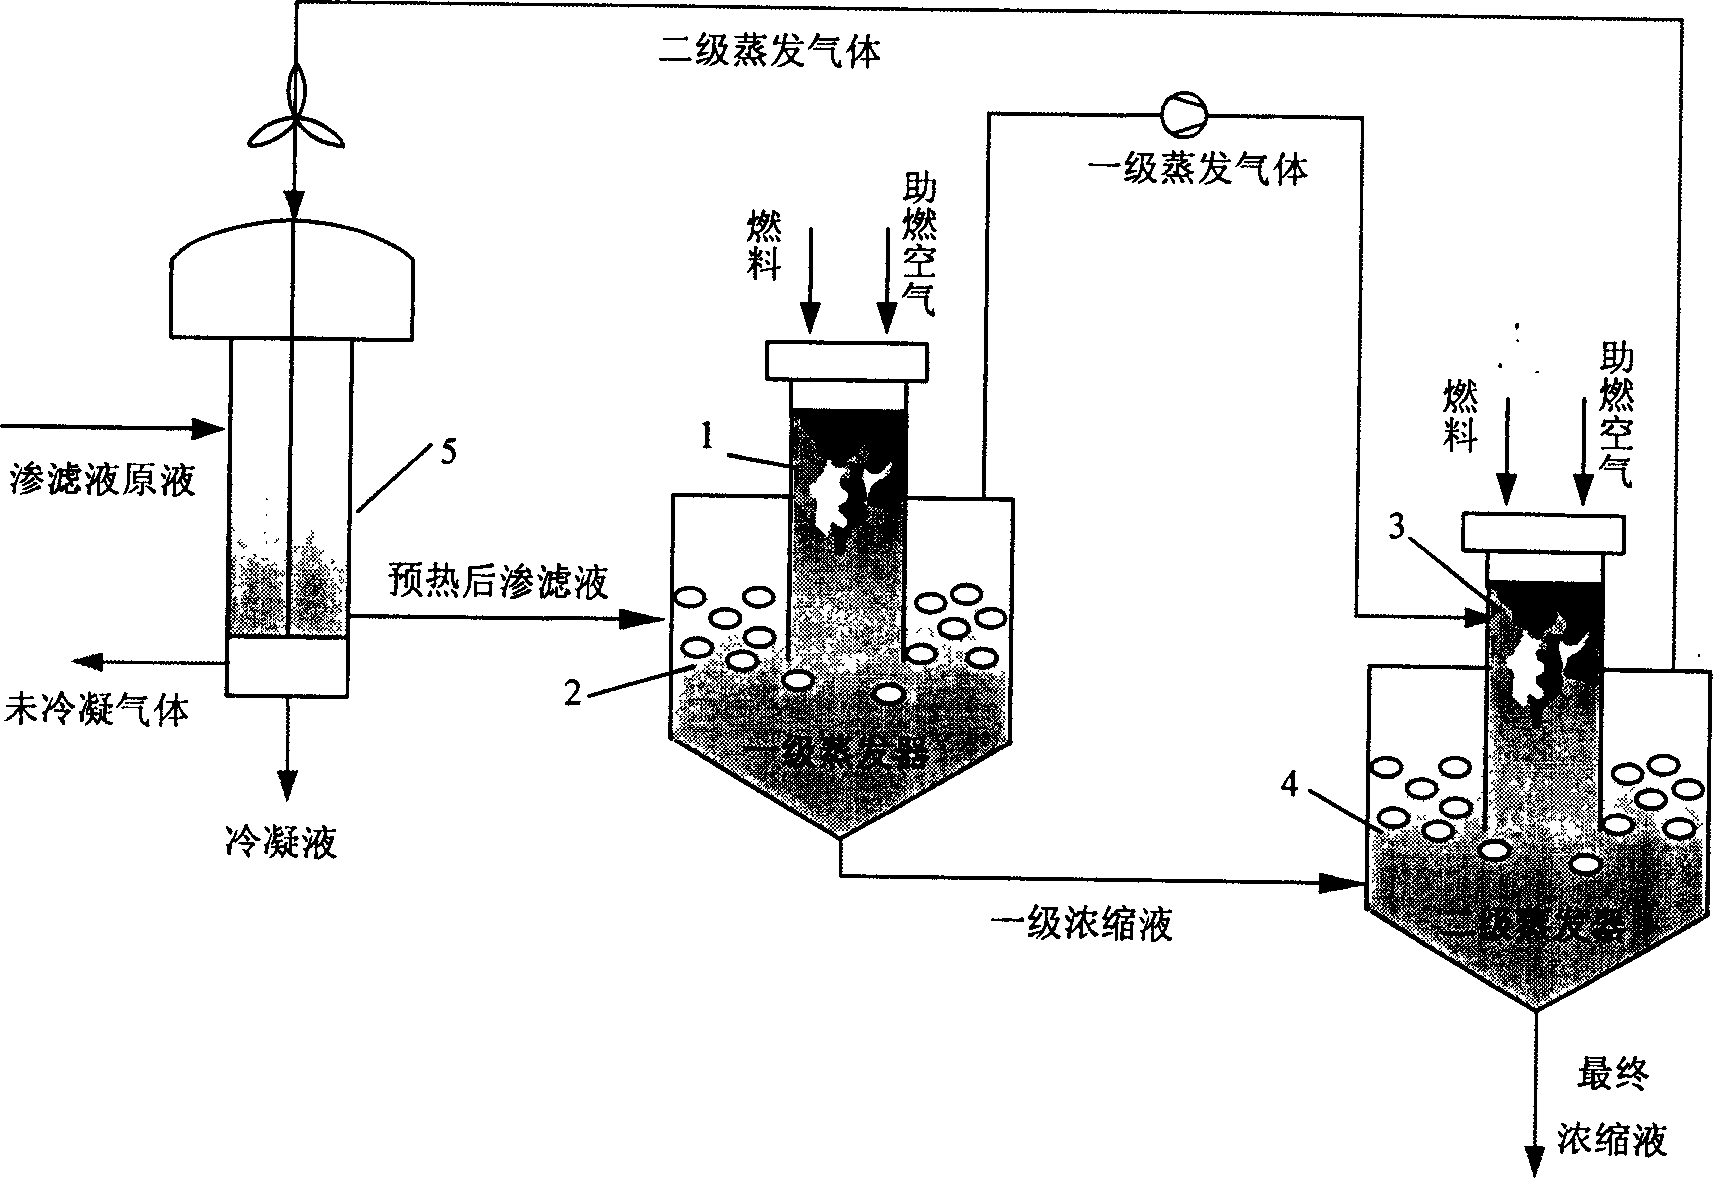 Two stage treatment of distillation concentration and incineration of diffusion liquid from refuse burying site